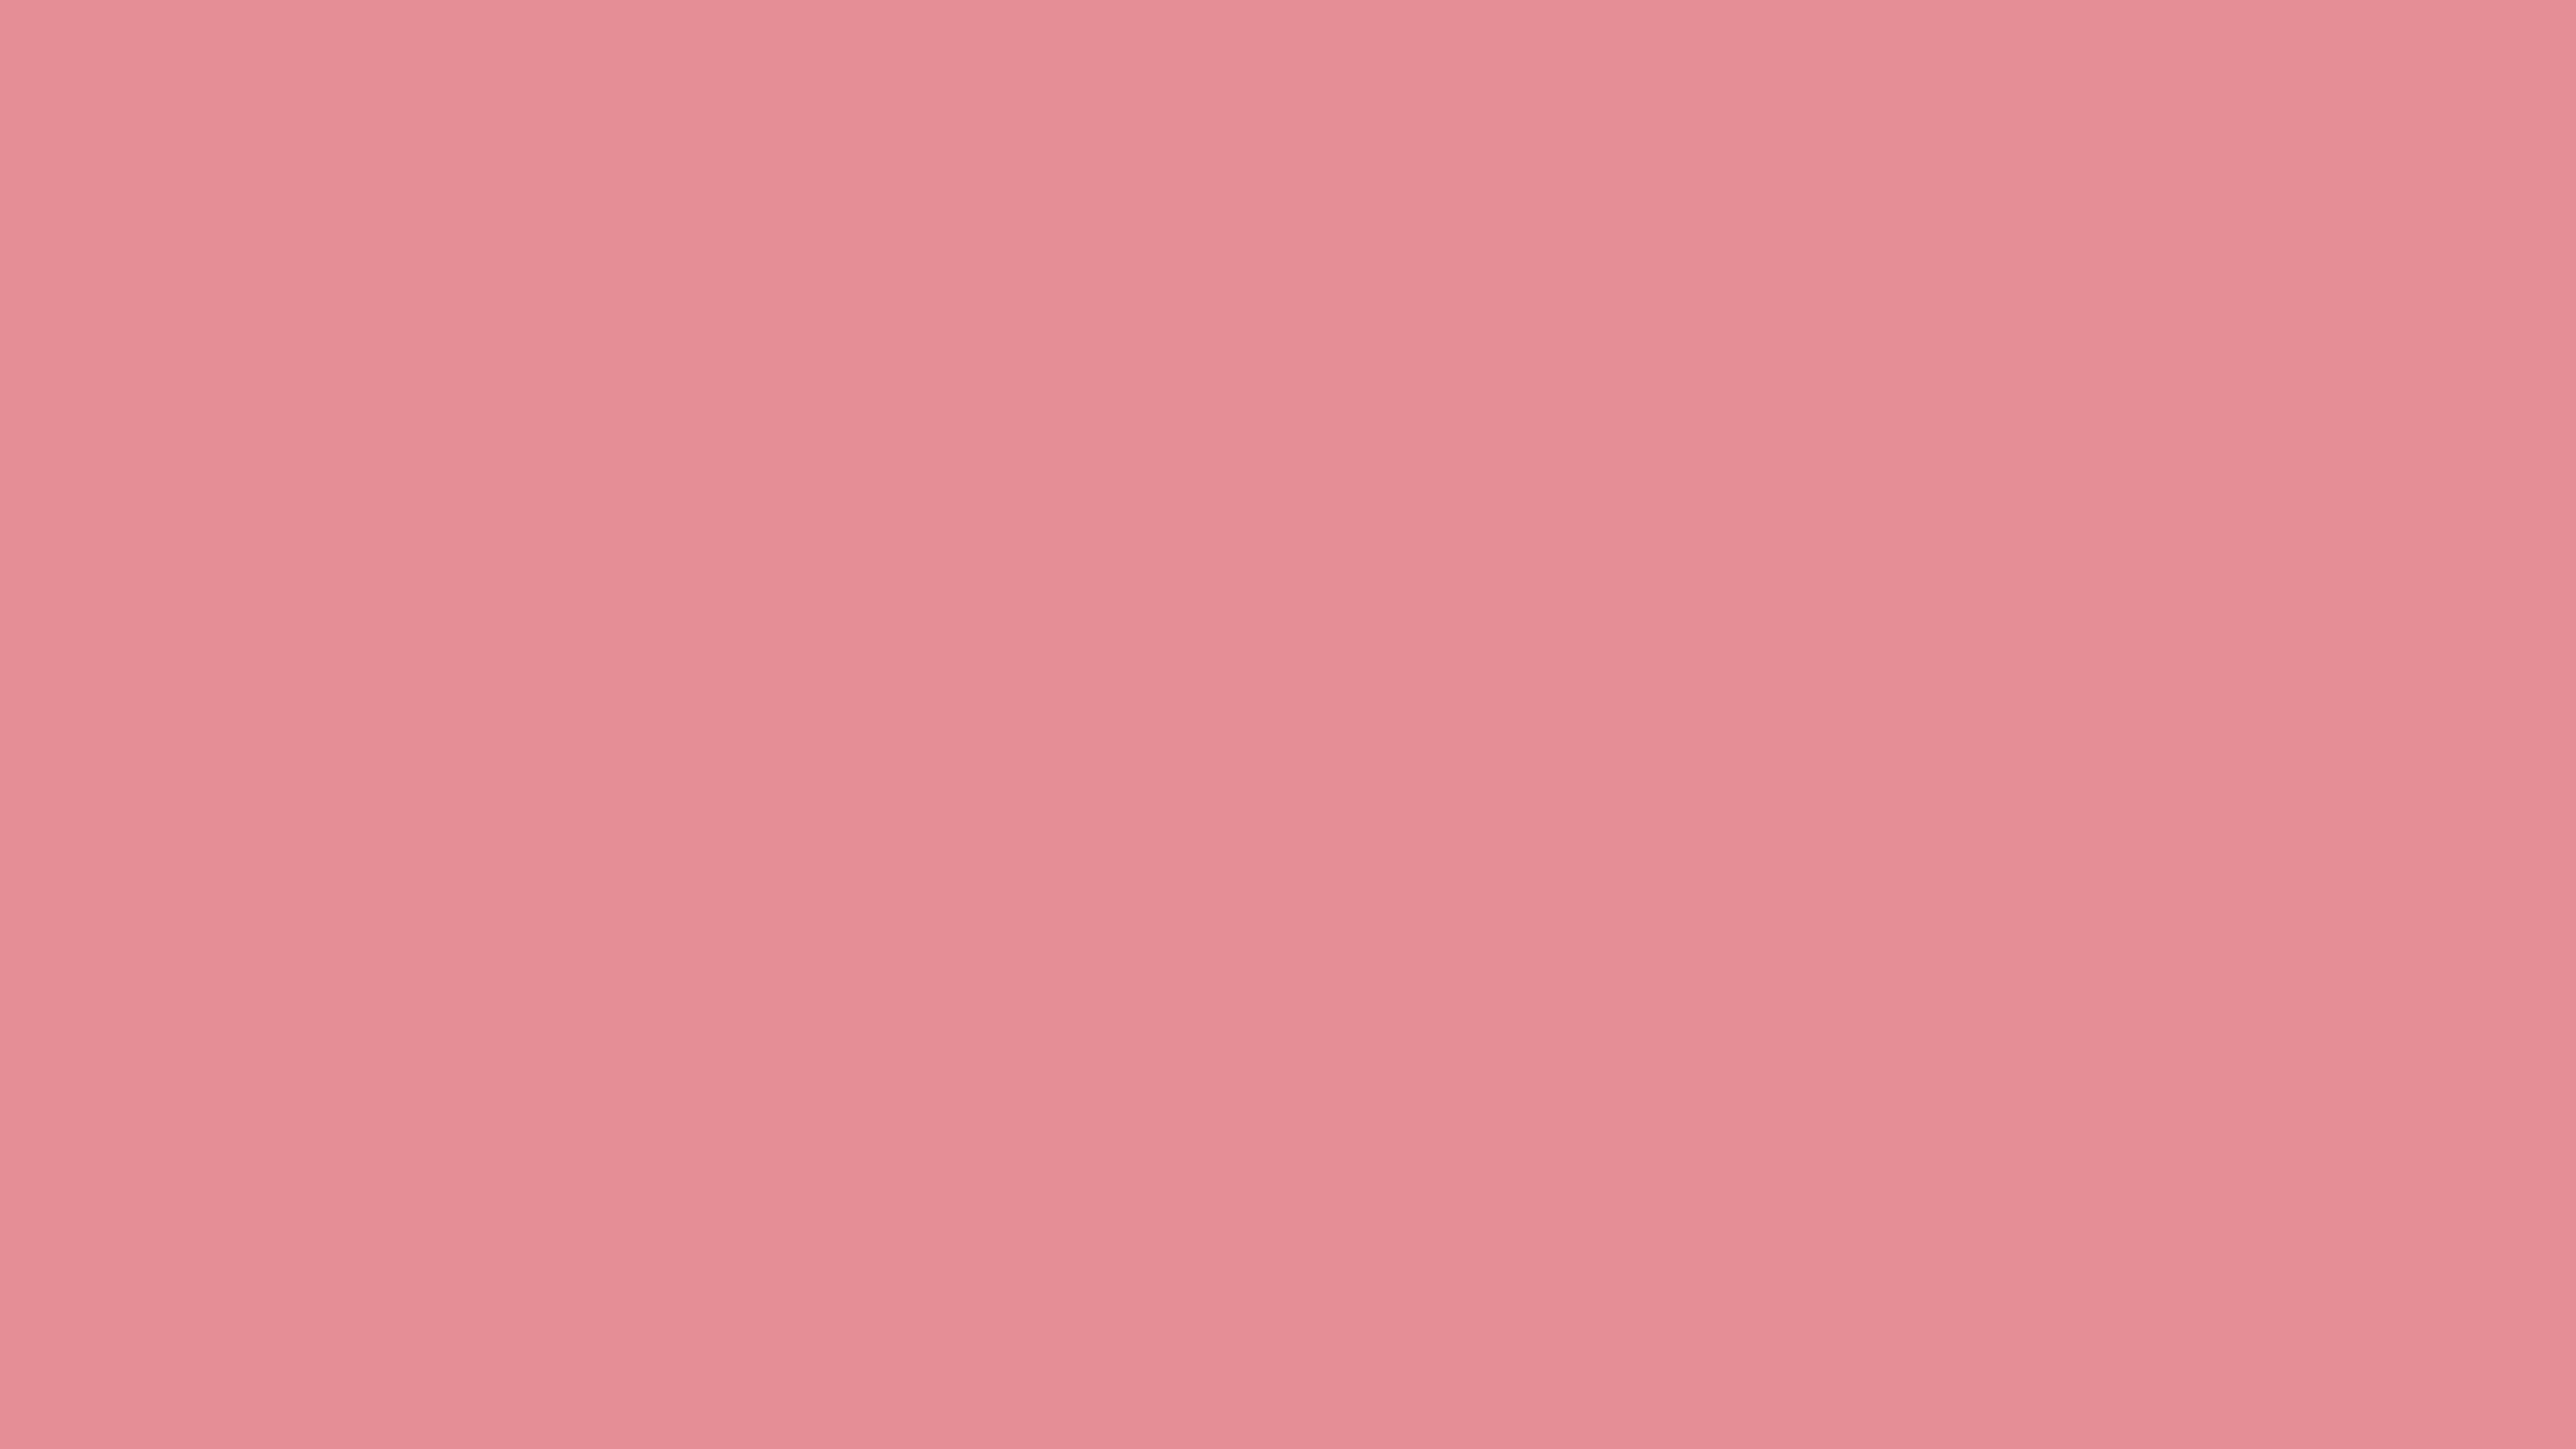 Poudretteite Pink Solid Color Background Image | Free Image Generator